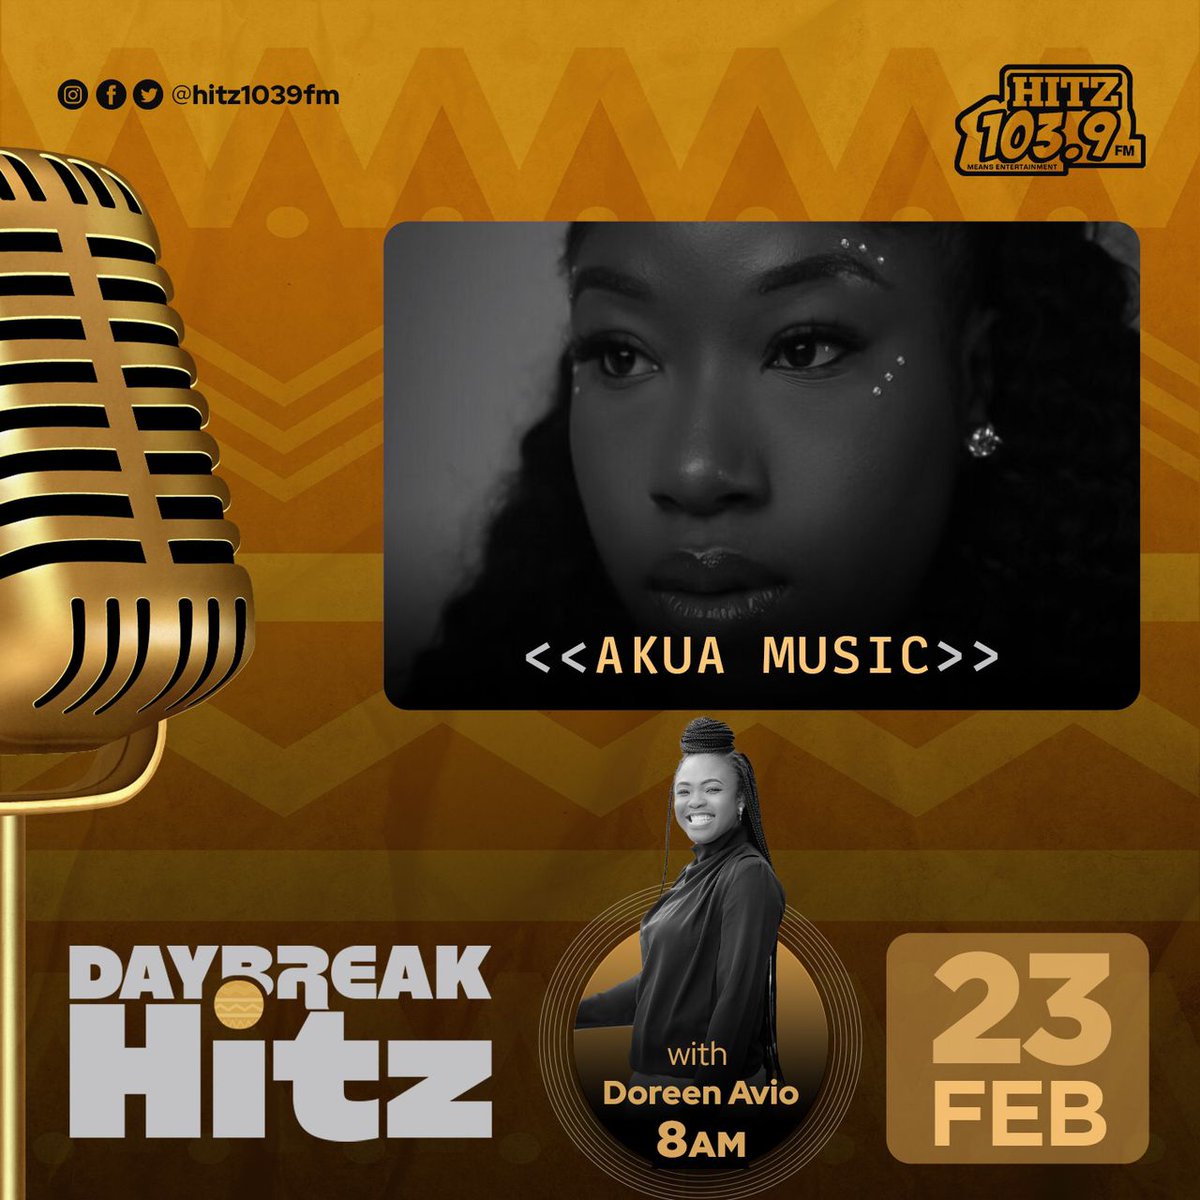 We will be having a conversation with Akua Music shortly on #DaybreakHitz with @DoreenAvio.